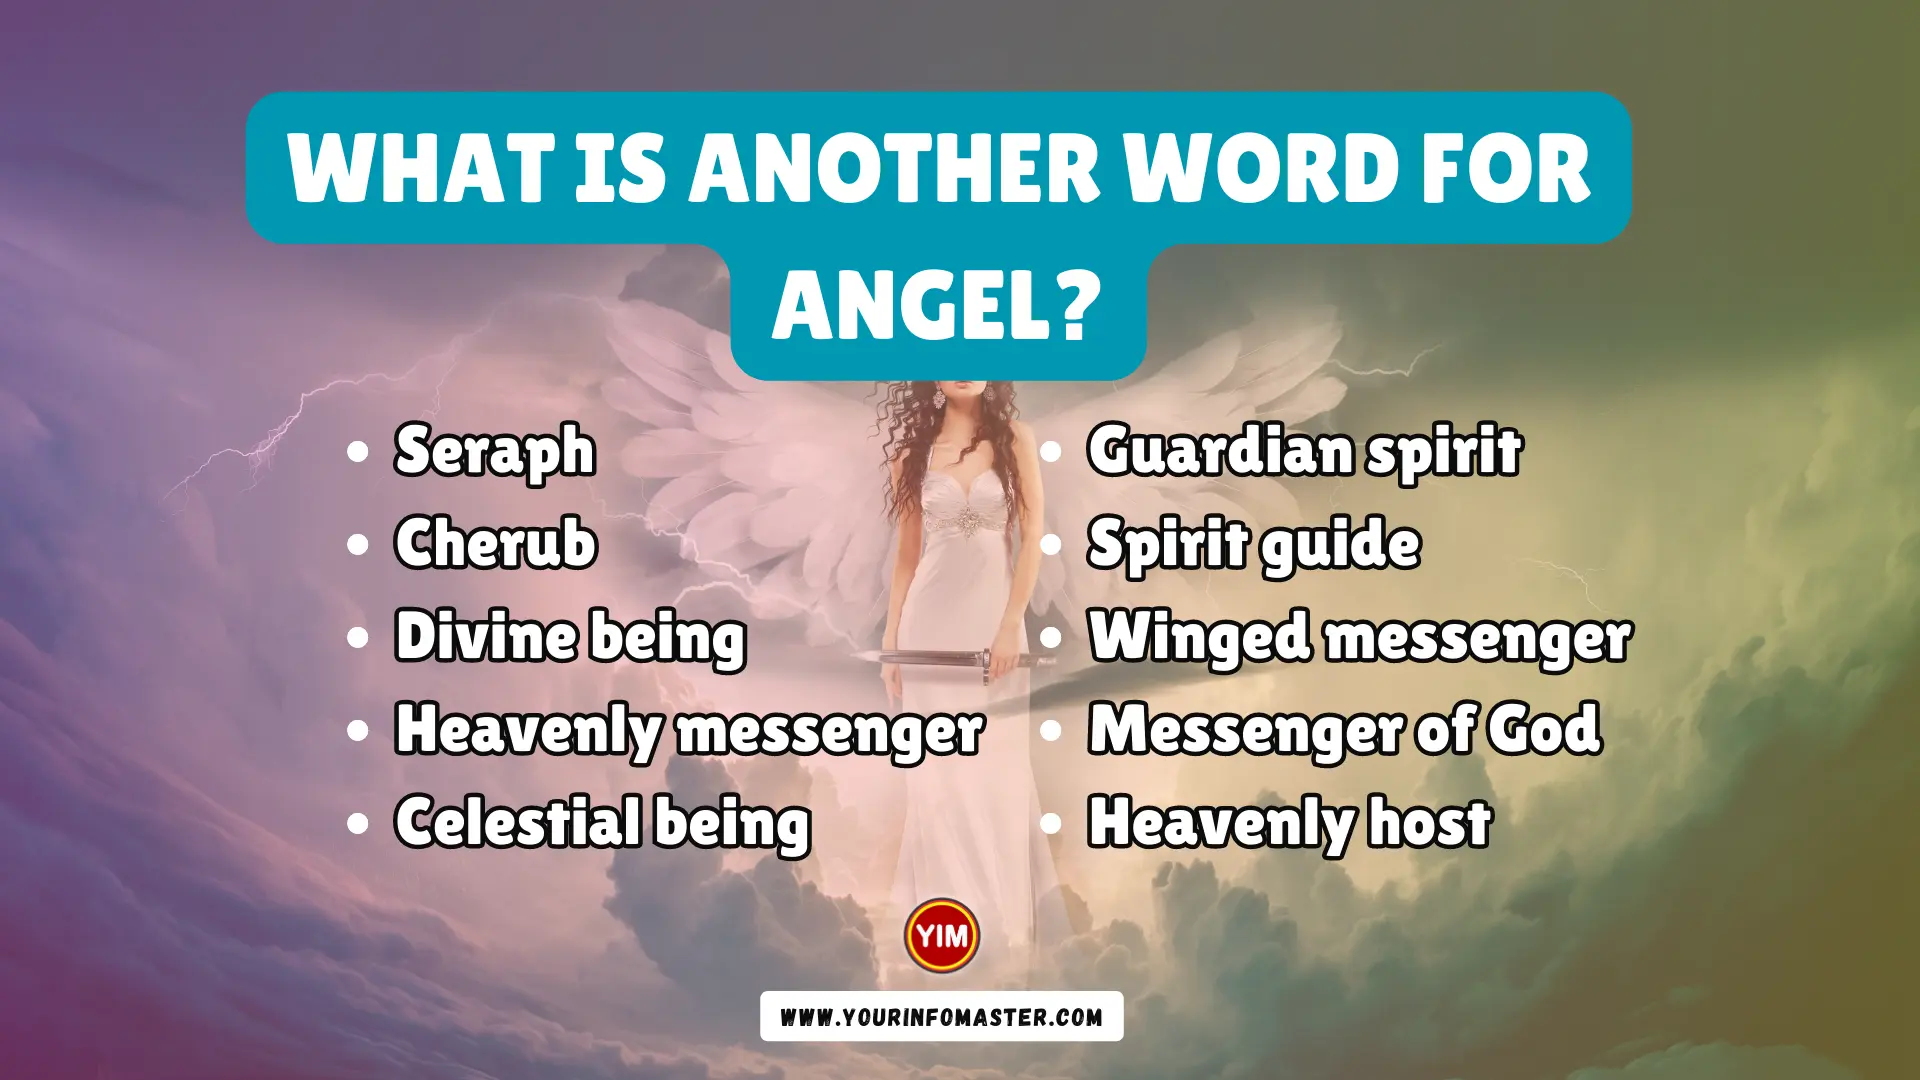 What is another word for Angel